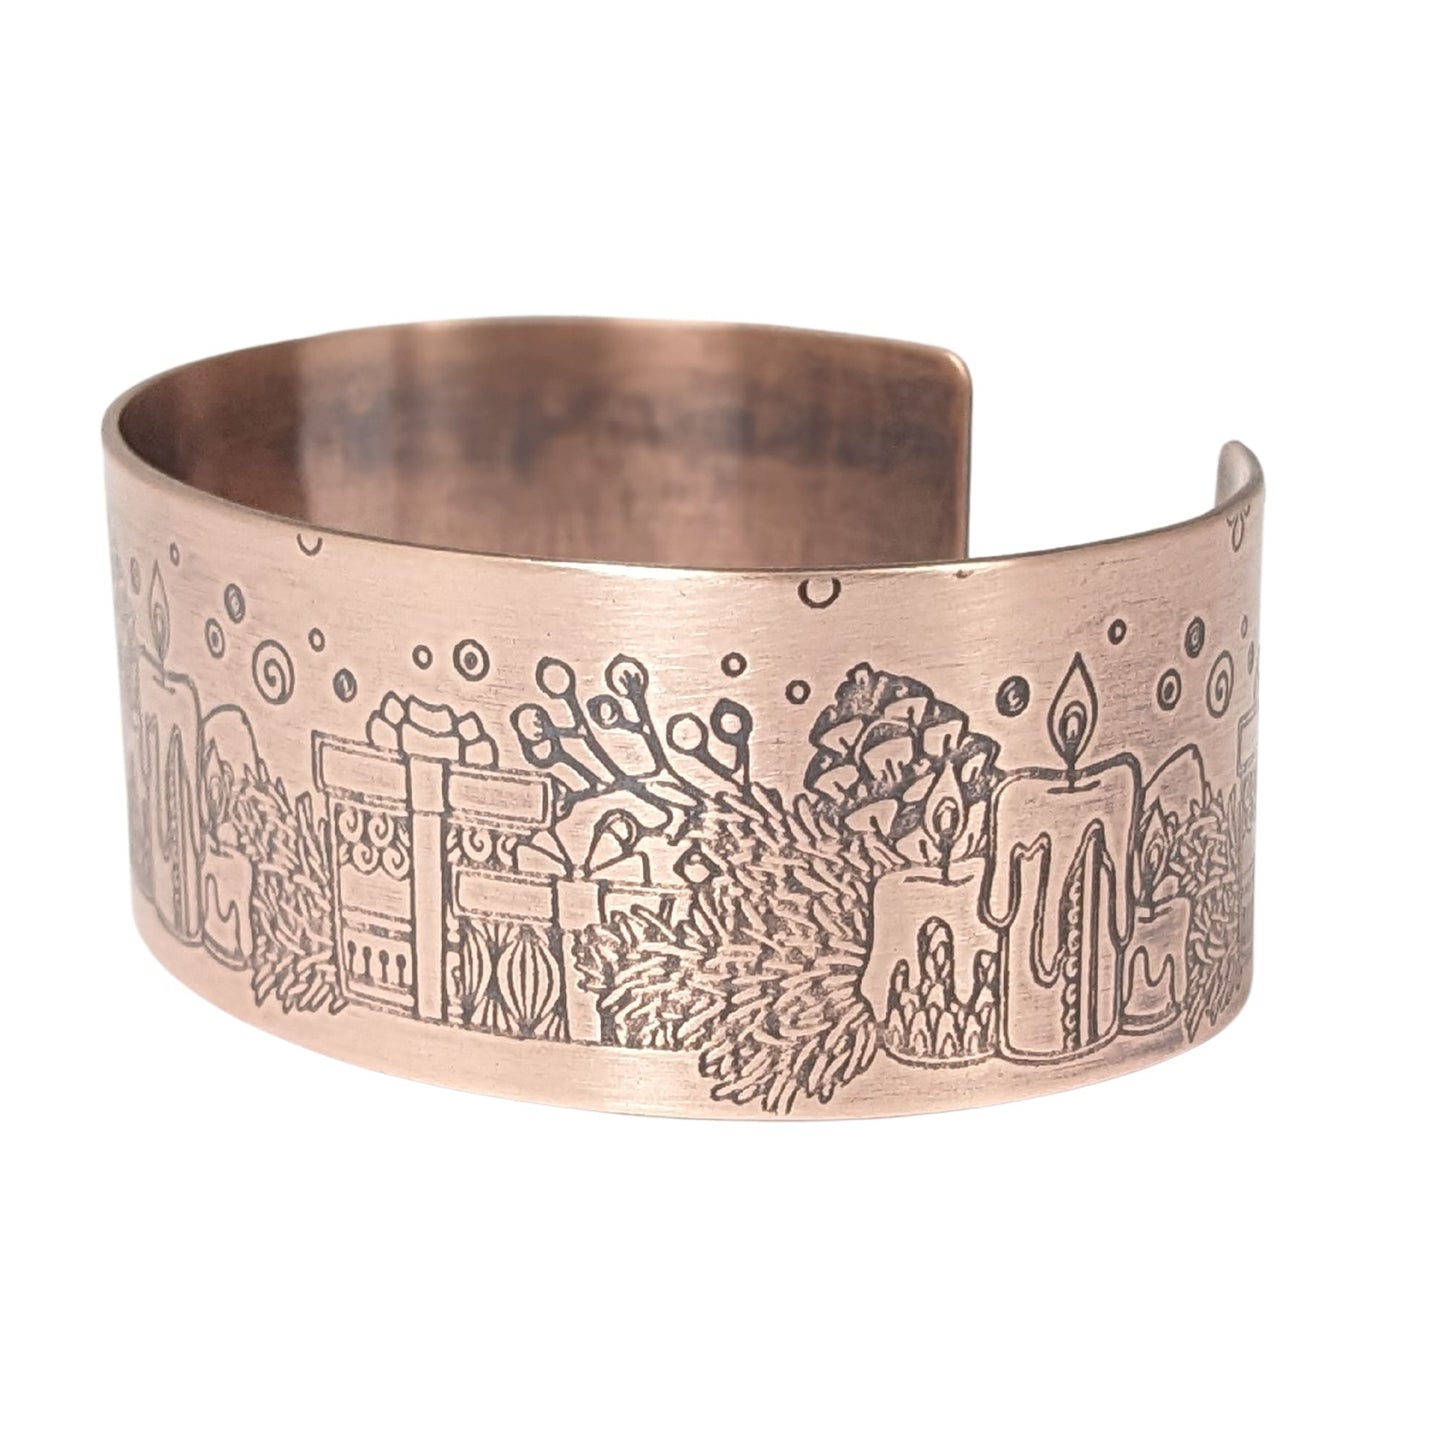 copper cuff bracelet with a christmas theme. the cuff is covered in impressions of candles, wrapped gifts, and evergreens